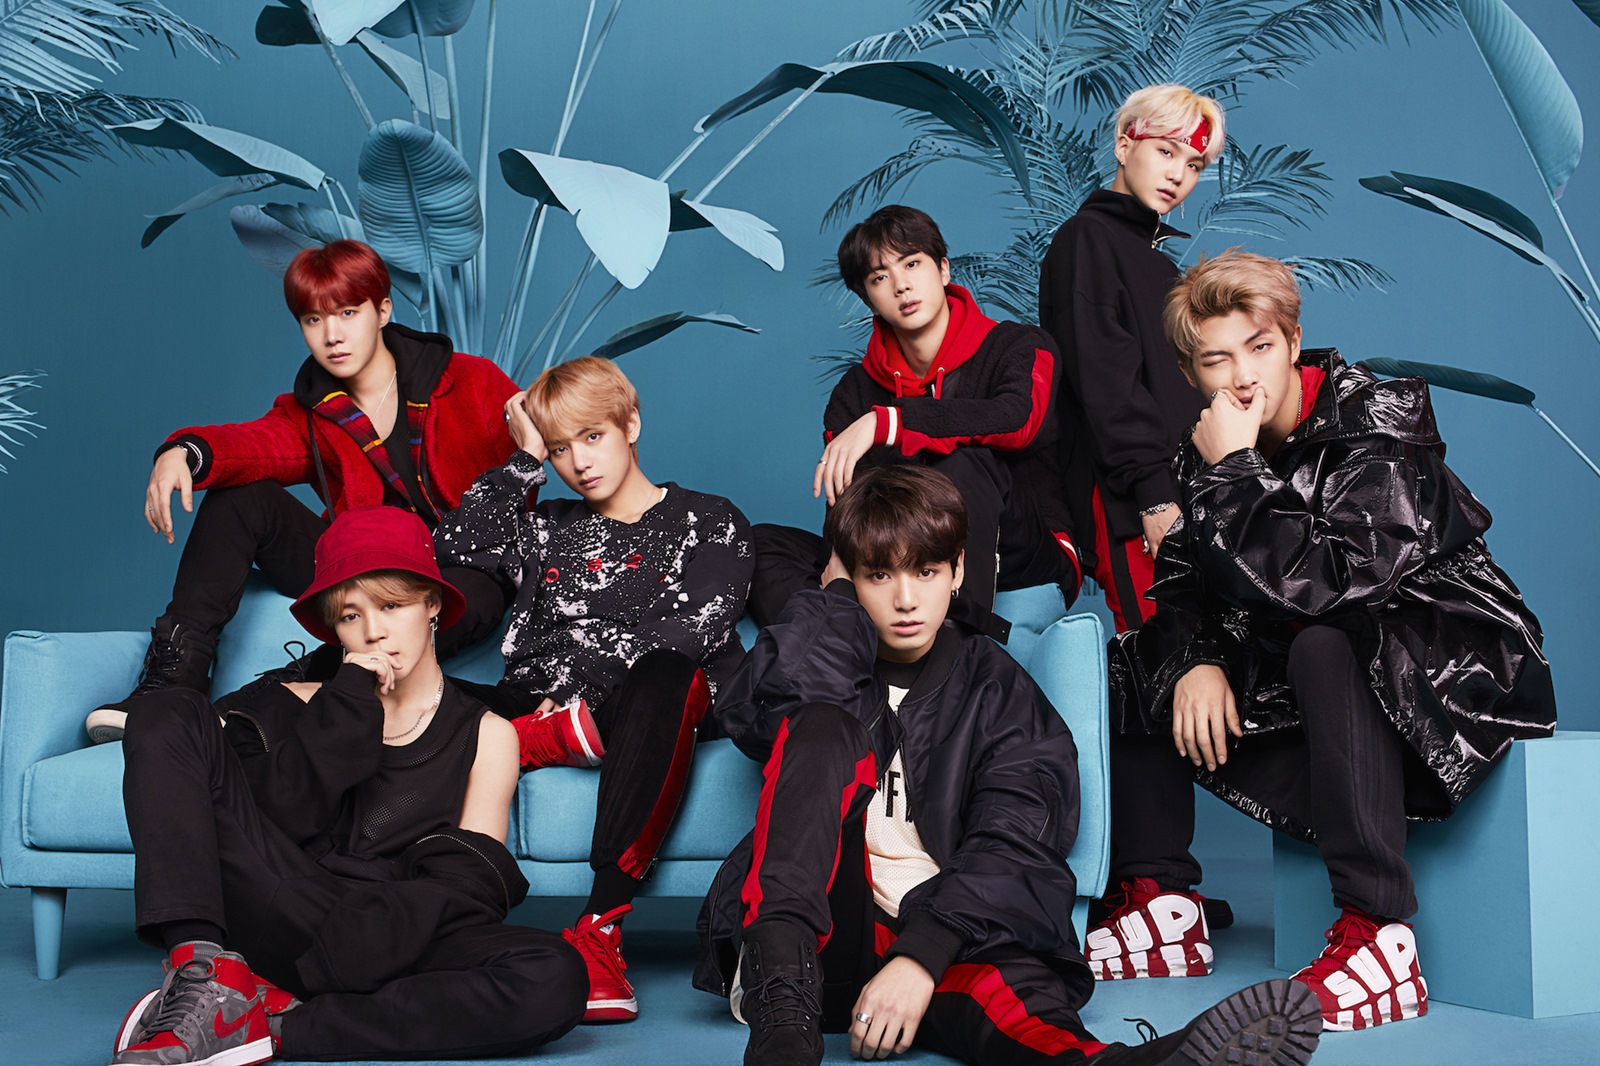 Group BTS has been certified as a platinum for three consecutive times in Japan.According to the Gold Disk Recognition Work released by the Japan Records Association on the 10th, BTSs Japan regular 3rd album FACE YOURSELF has exceeded 250,000 copies of sales and obtained Platinum certification.It is the third platinum record following the single Blood Sweat Tears () released in May last year and the single MIC Drop/DNA/Crystal Snow released in December.In particular, BTS recorded more than 500,000 copies of sales with its eighth single MIC Drop/DNA/Crystal Snow released in December last year, making it the only overseas artist to release a single album in Japan in 2017, and it has set a milestone to receive the Double Jeopardy Platinum certification.Based on the cumulative sales volume of the album every month, the Japan Record Association classifies 100,000 copies of Lee Tzsche Gold, 250,000 copies of Lee Tzsche platinum, and 500,000 copies of Lee Tzsche Double Jeopardy platinum.On the other hand, BTS will release its third full-length album LOVE YOURSELF Tear on May 18 and release the new albums new song stage for the first time in the world at the 2018 Billboards Music Awards held at United States of America Las Vegas on the 20th (local time).PHOTOS: Big Hit